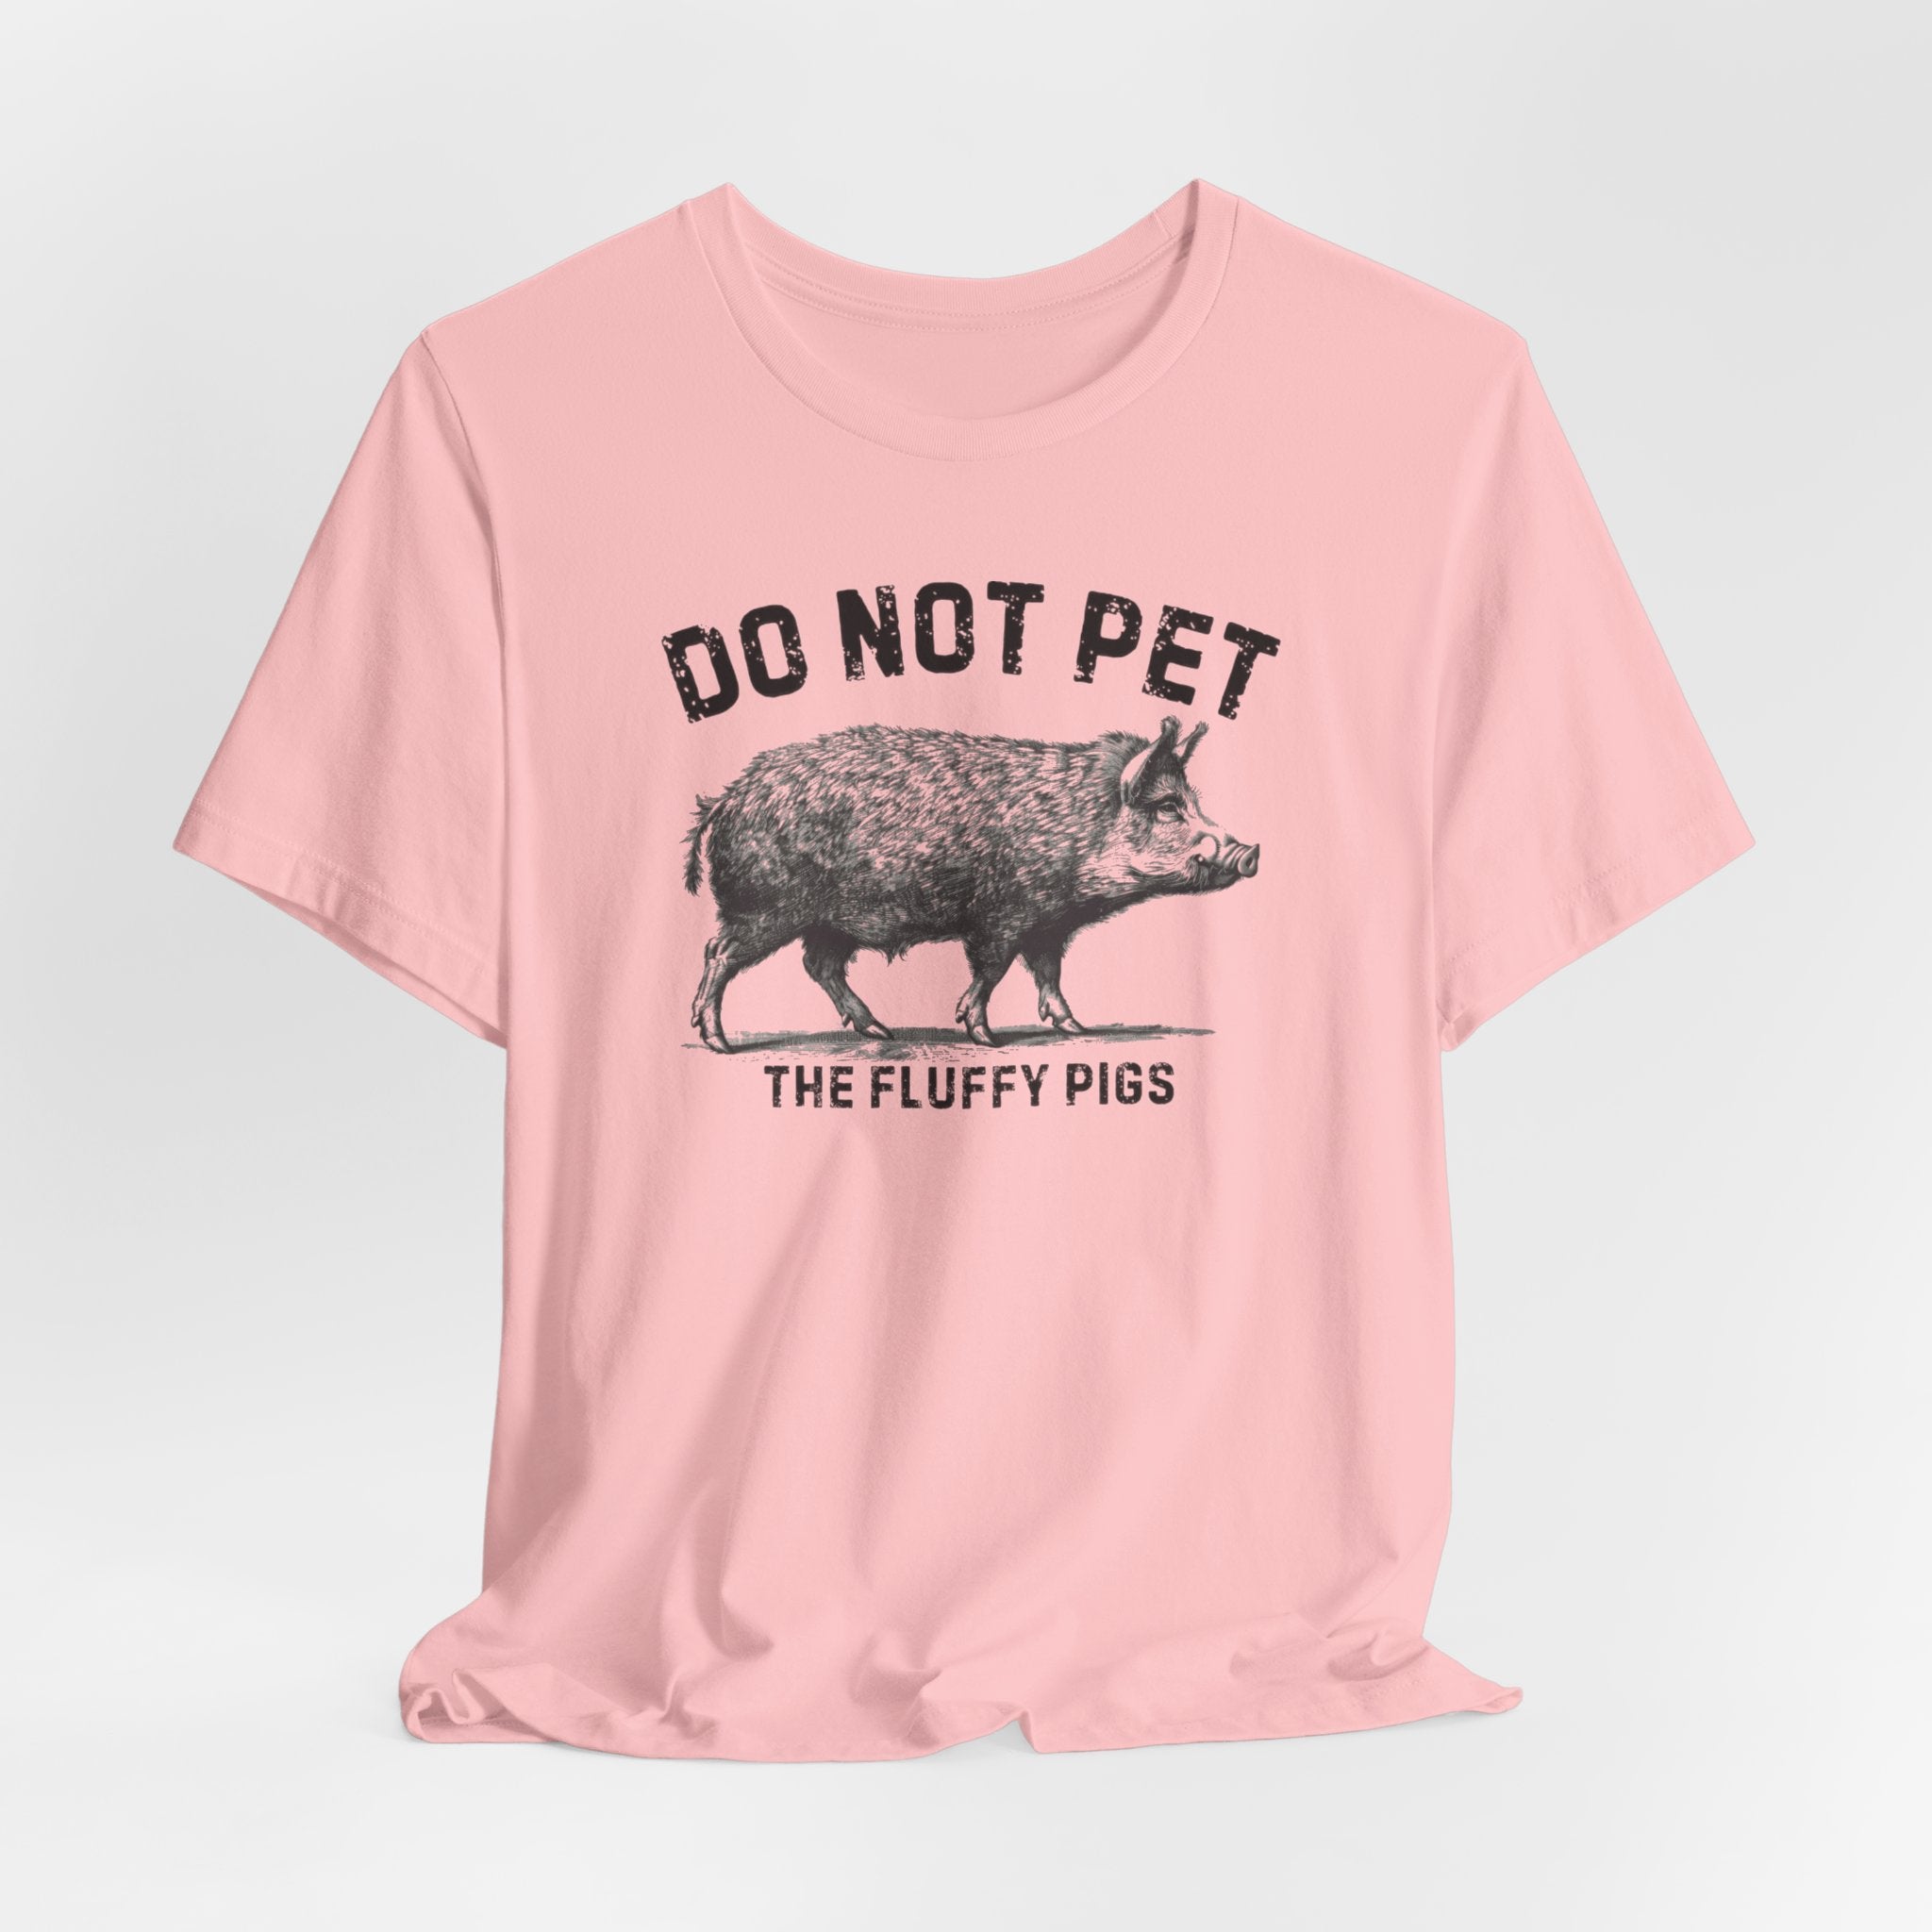 Do Not Pet The Fluffy Pigs Shirt Funny Animal Lover Tee